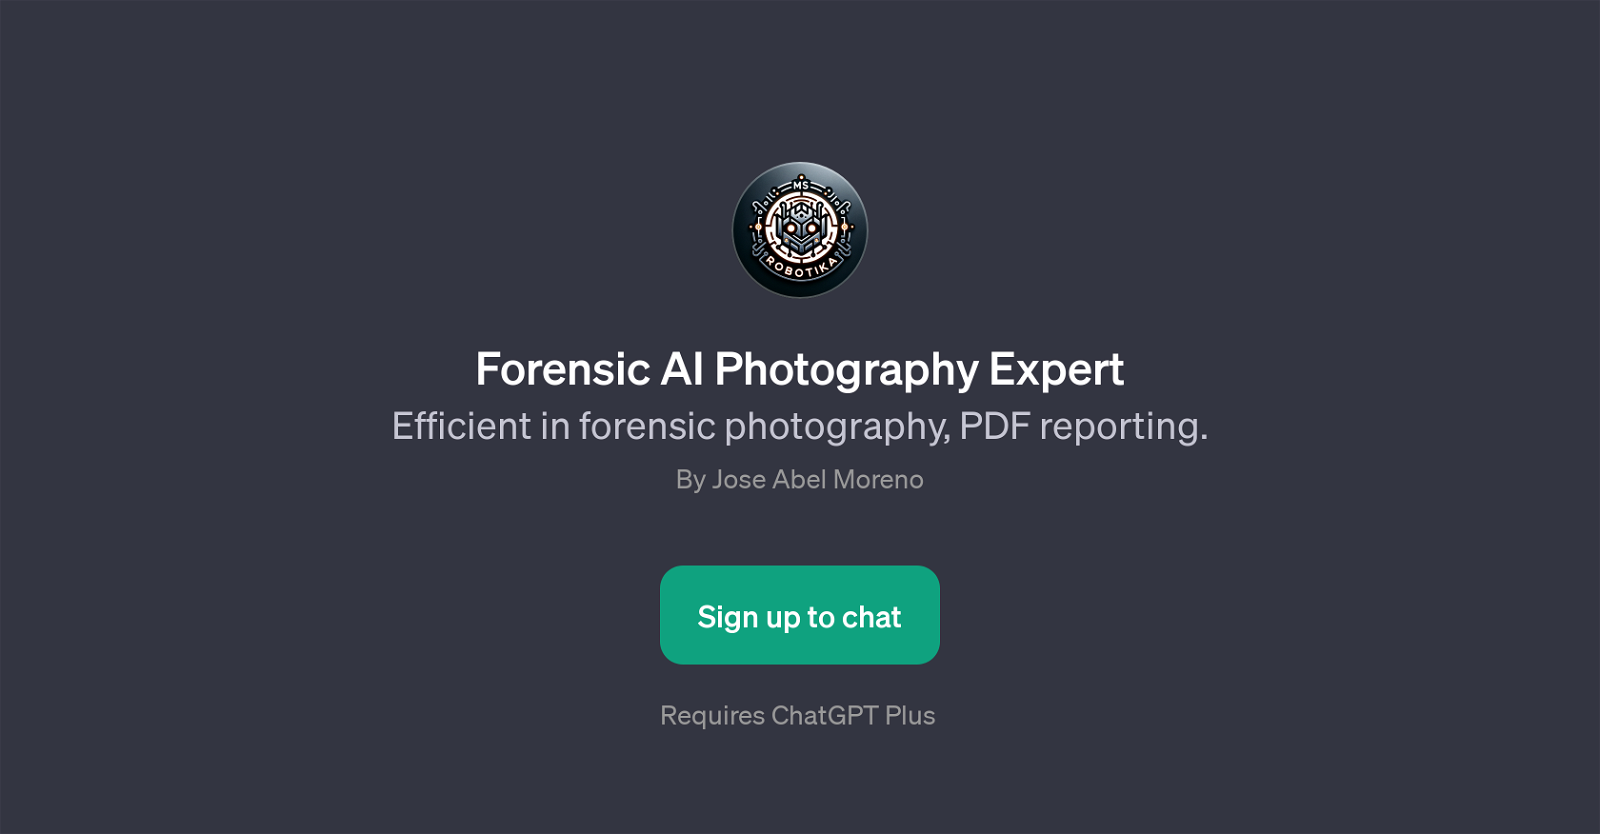 Forensic AI Photography Expert website